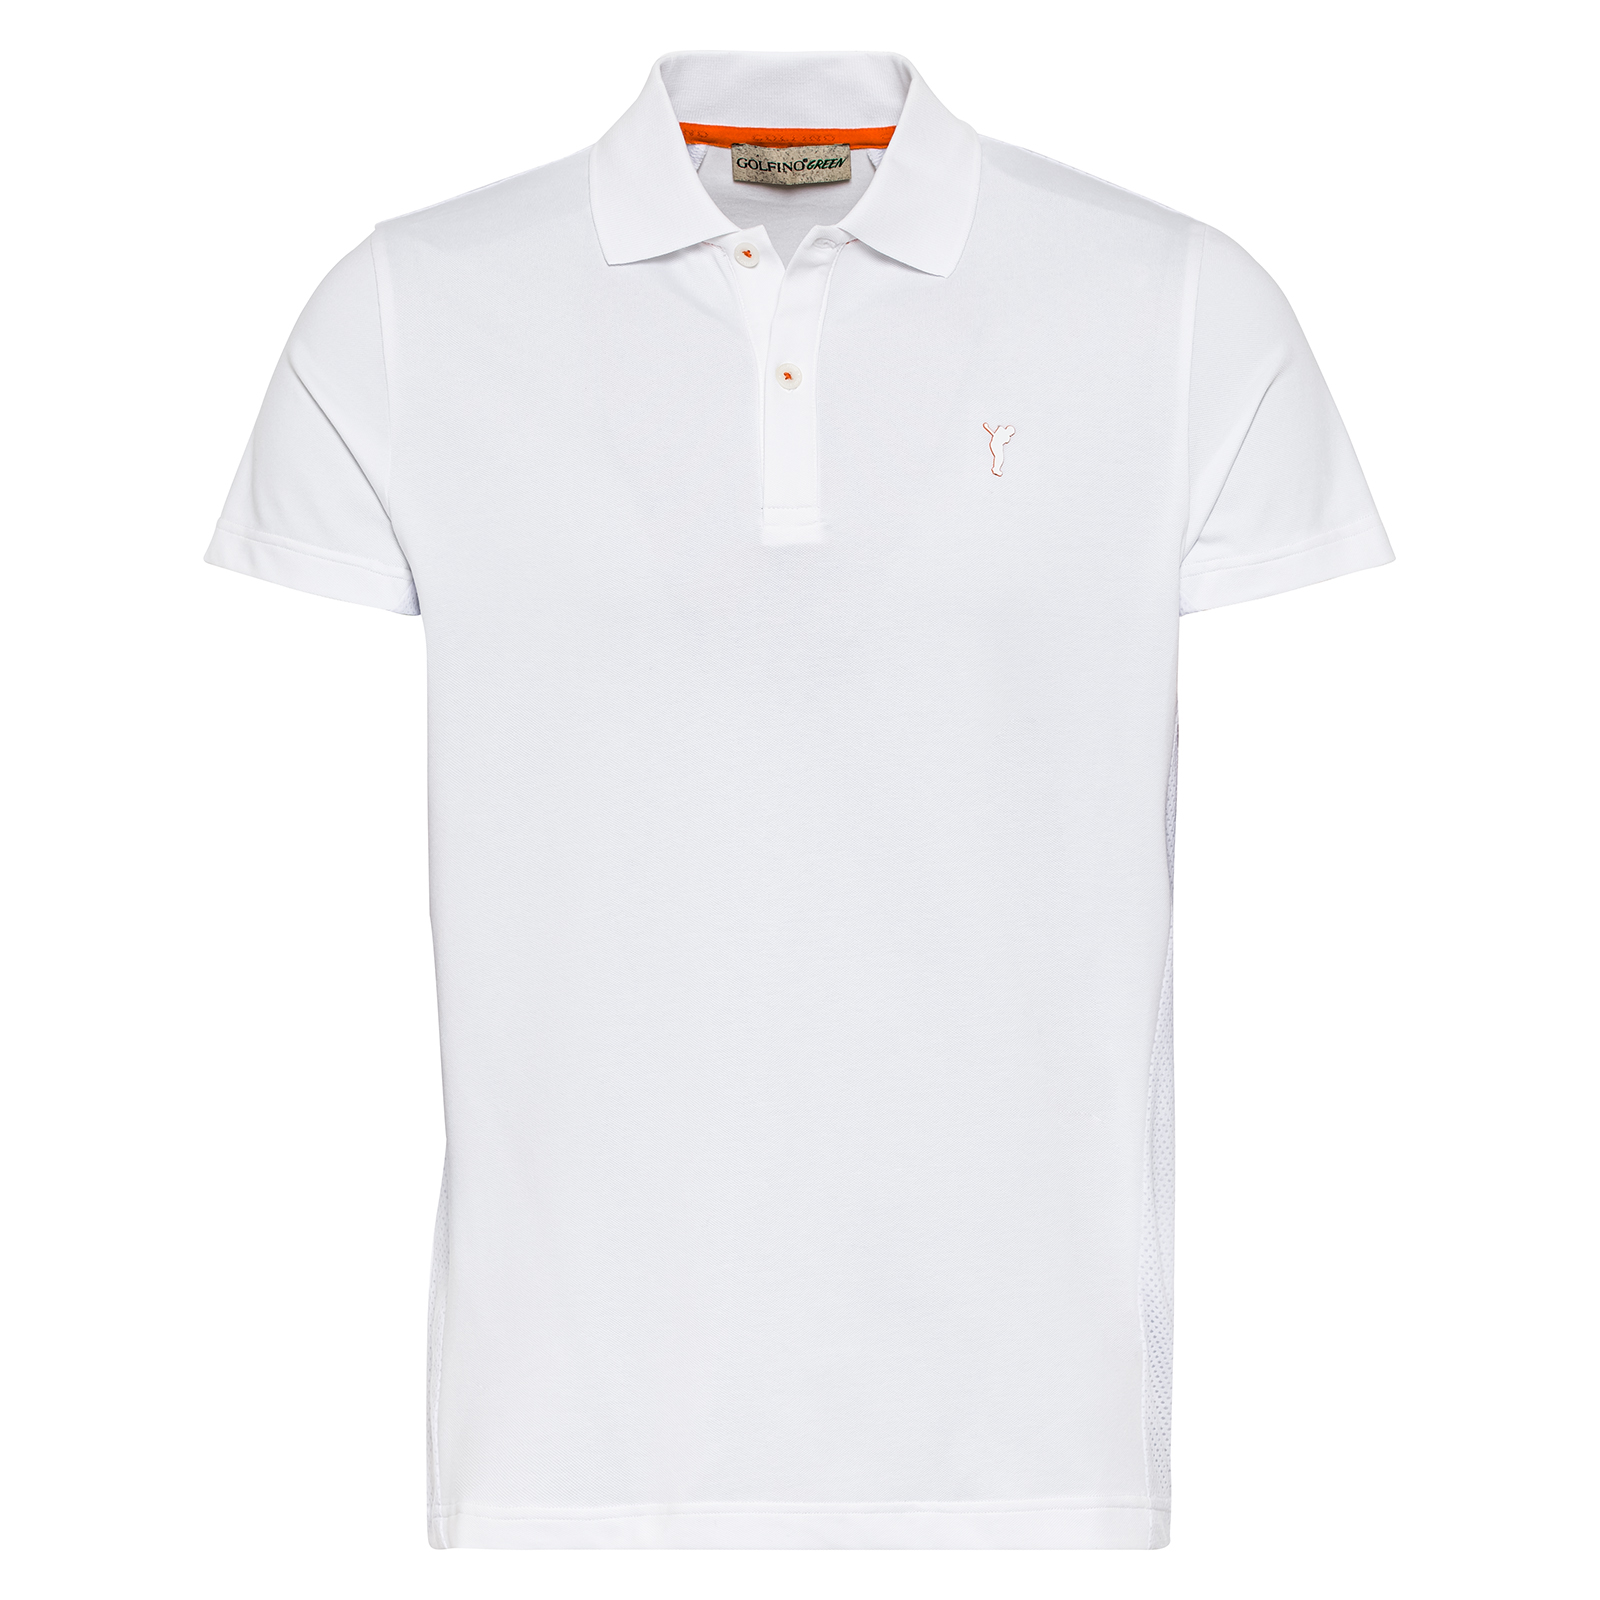 Men's breathable golf polo shirt made from recycled synthetic fibre 